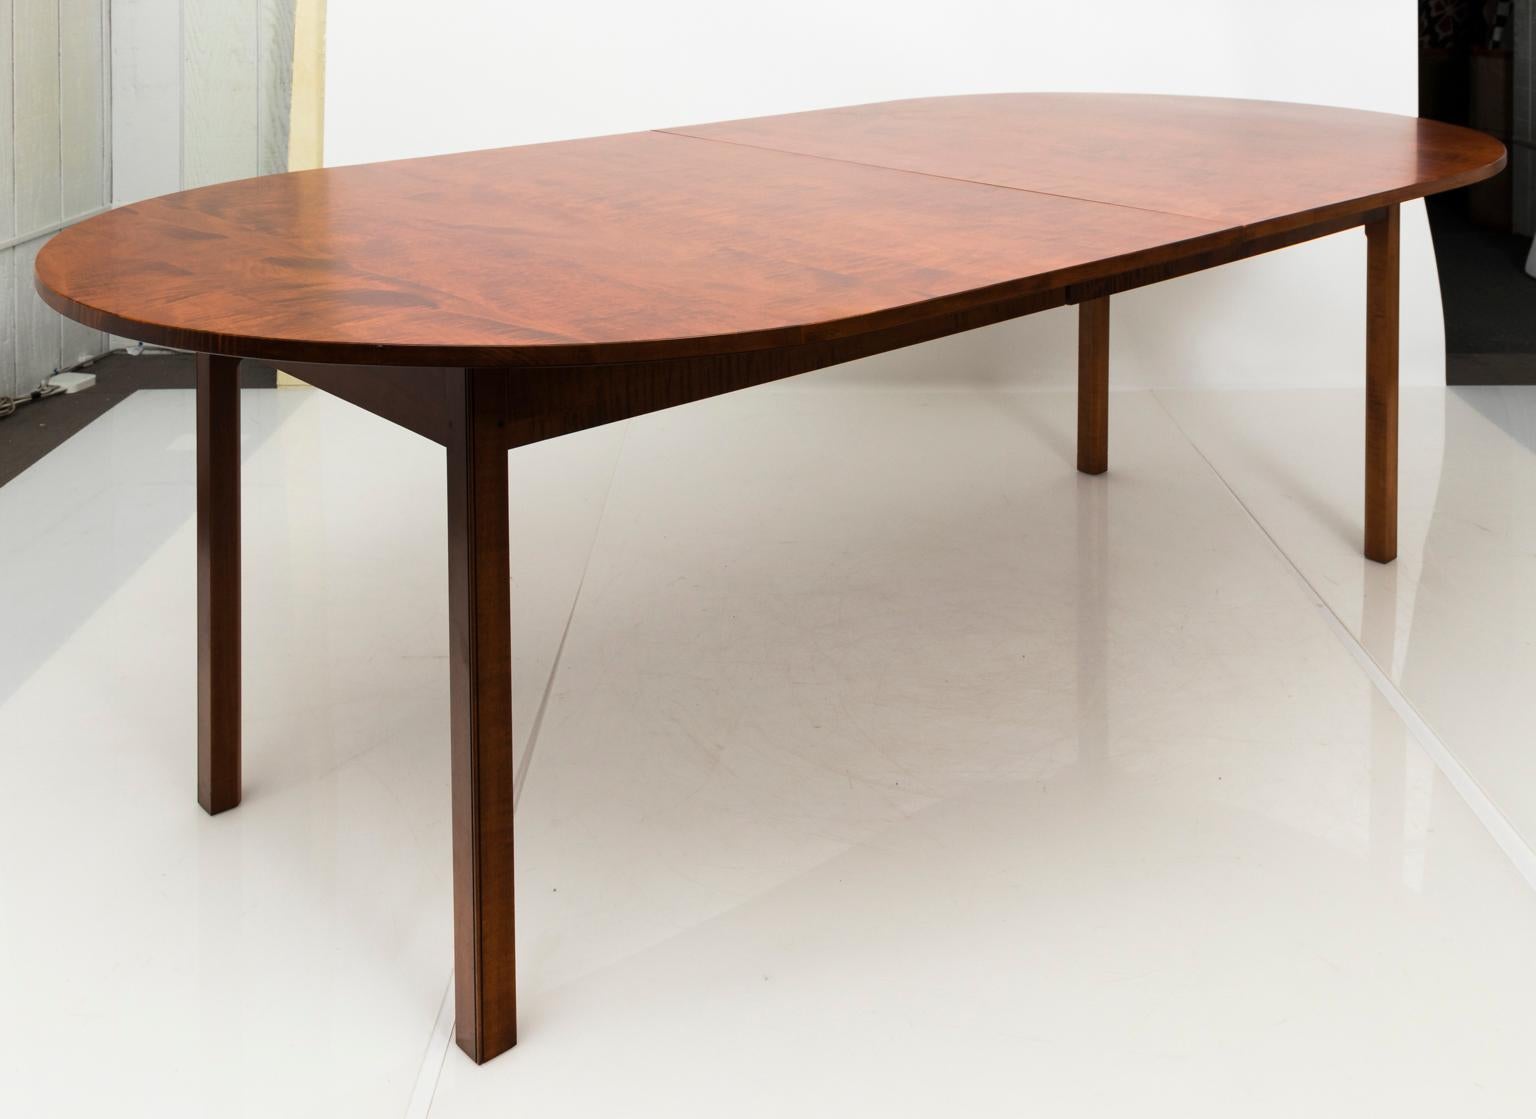 Tiger Maple Dining Room Table by David Lefort, circa 2000 2